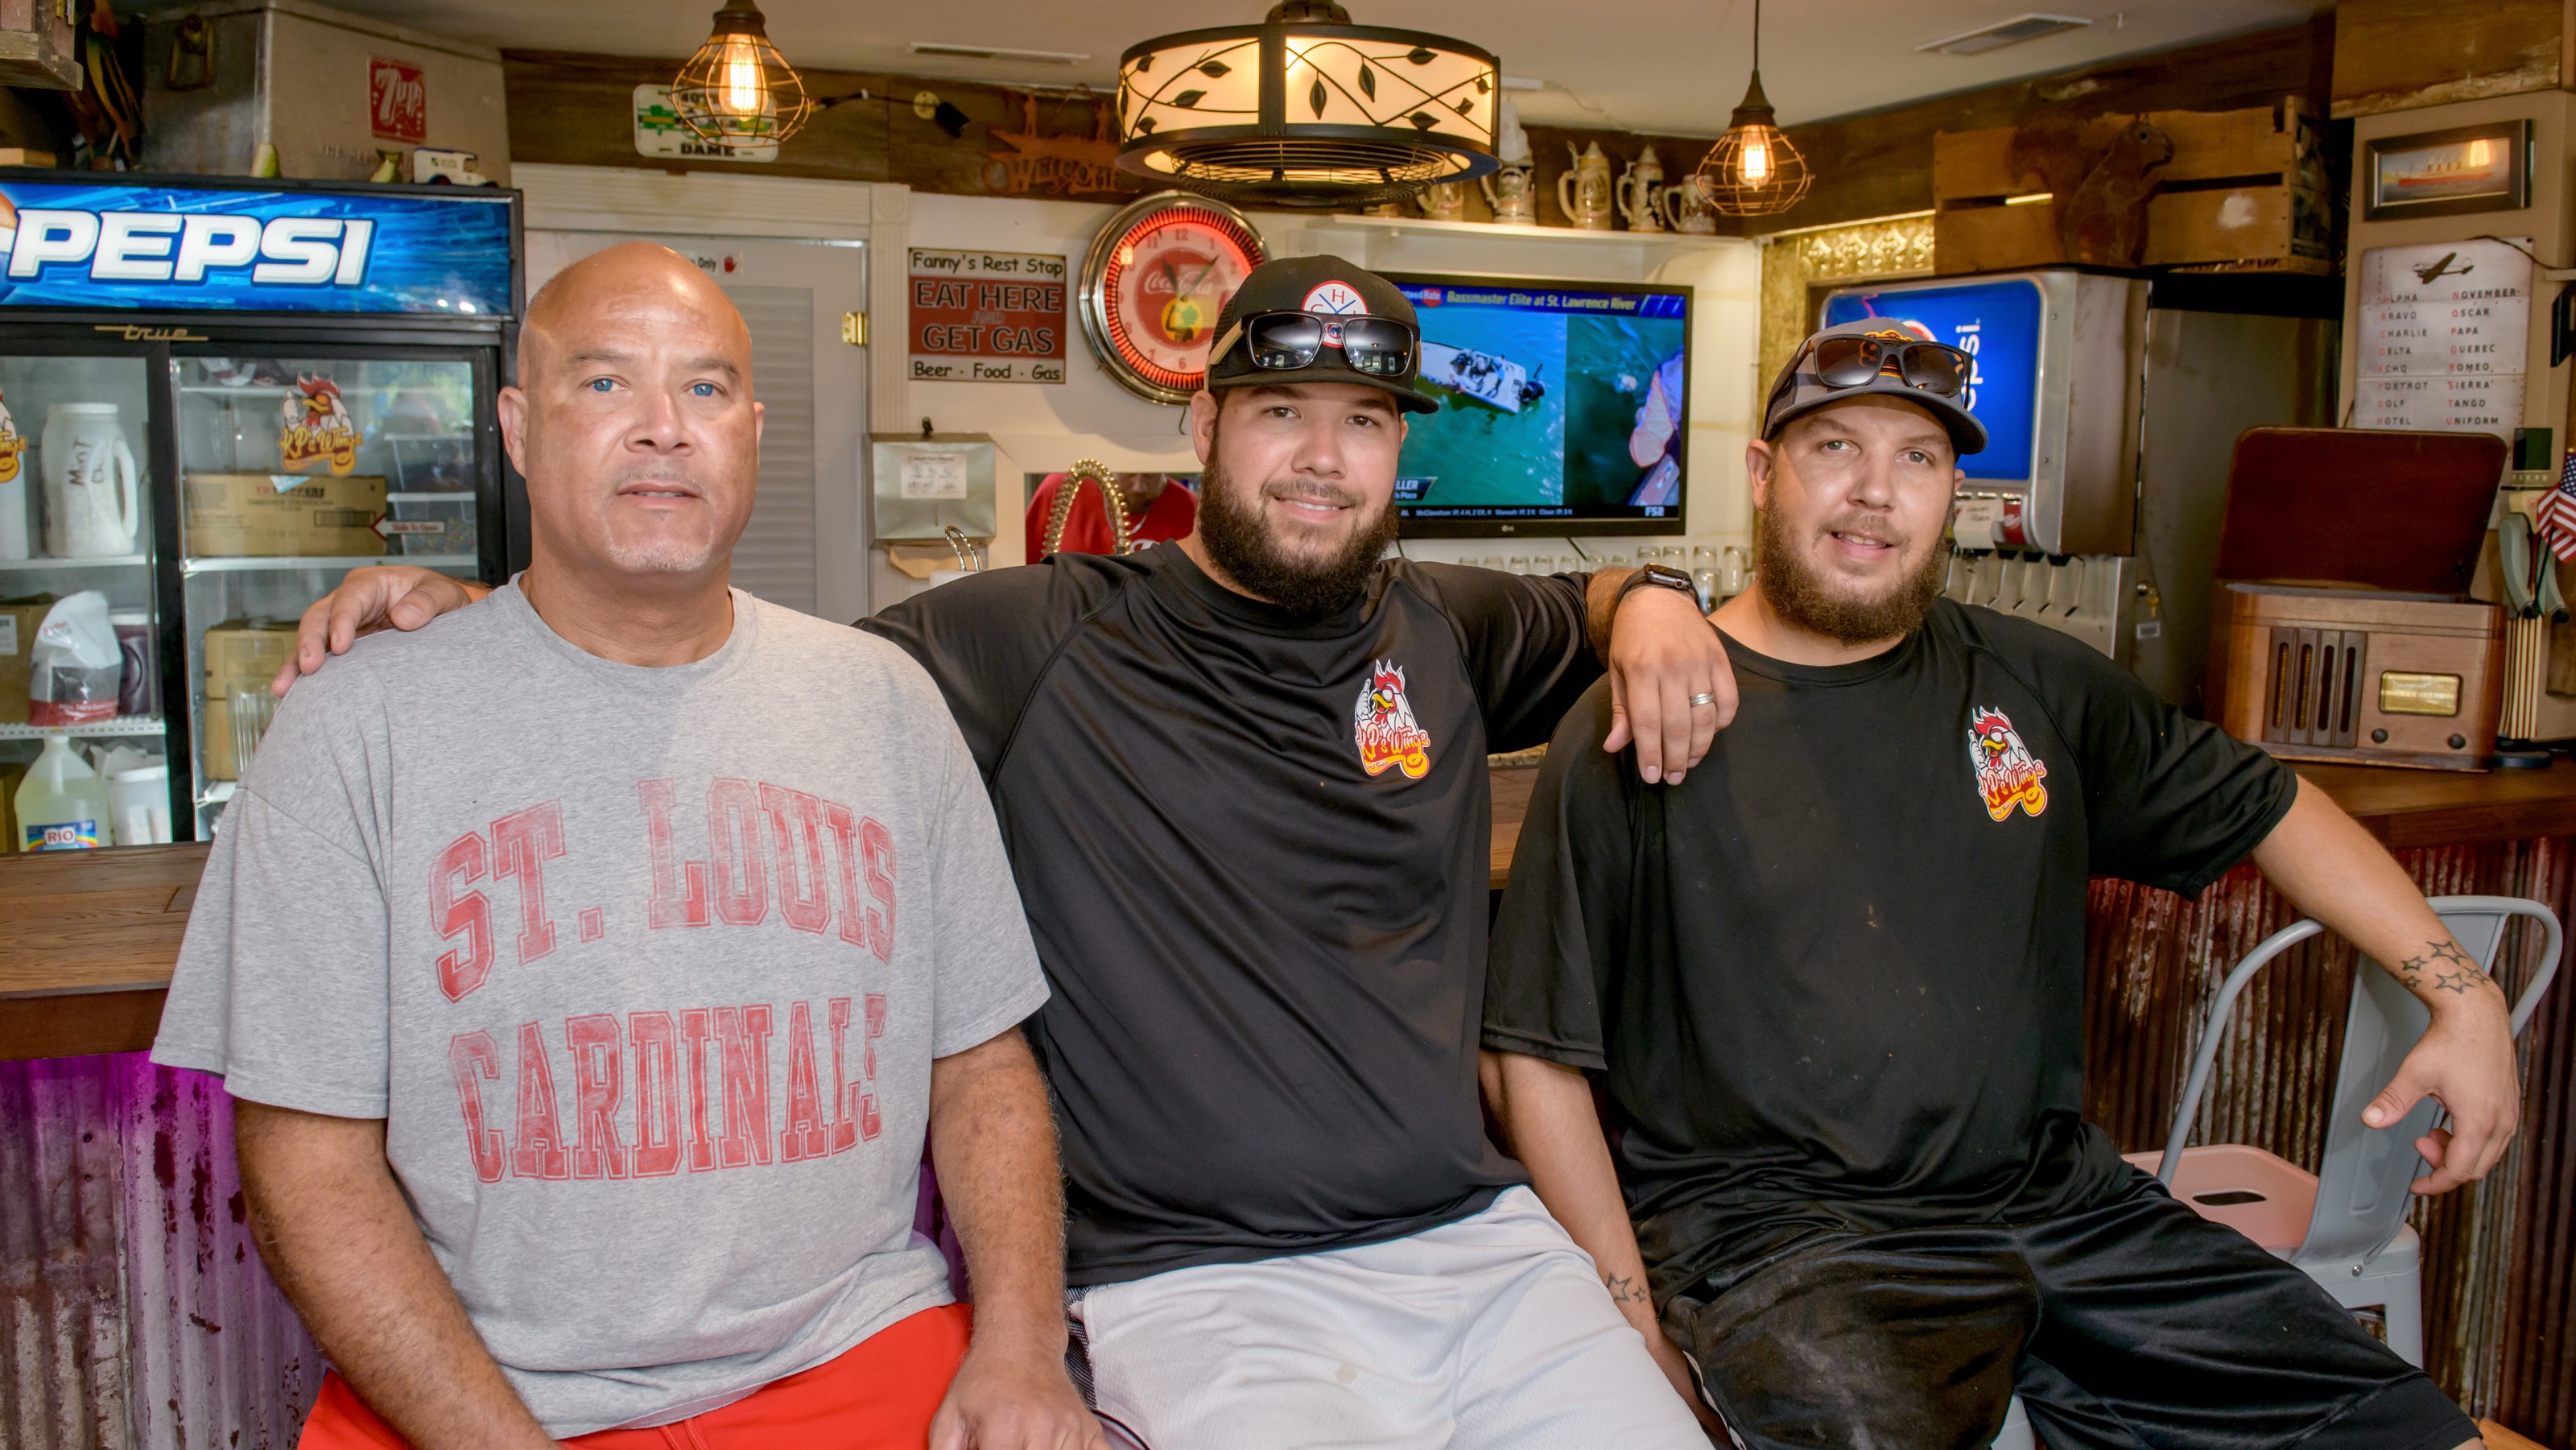  Wings, fries and family: How this small business opened in Hanna City 